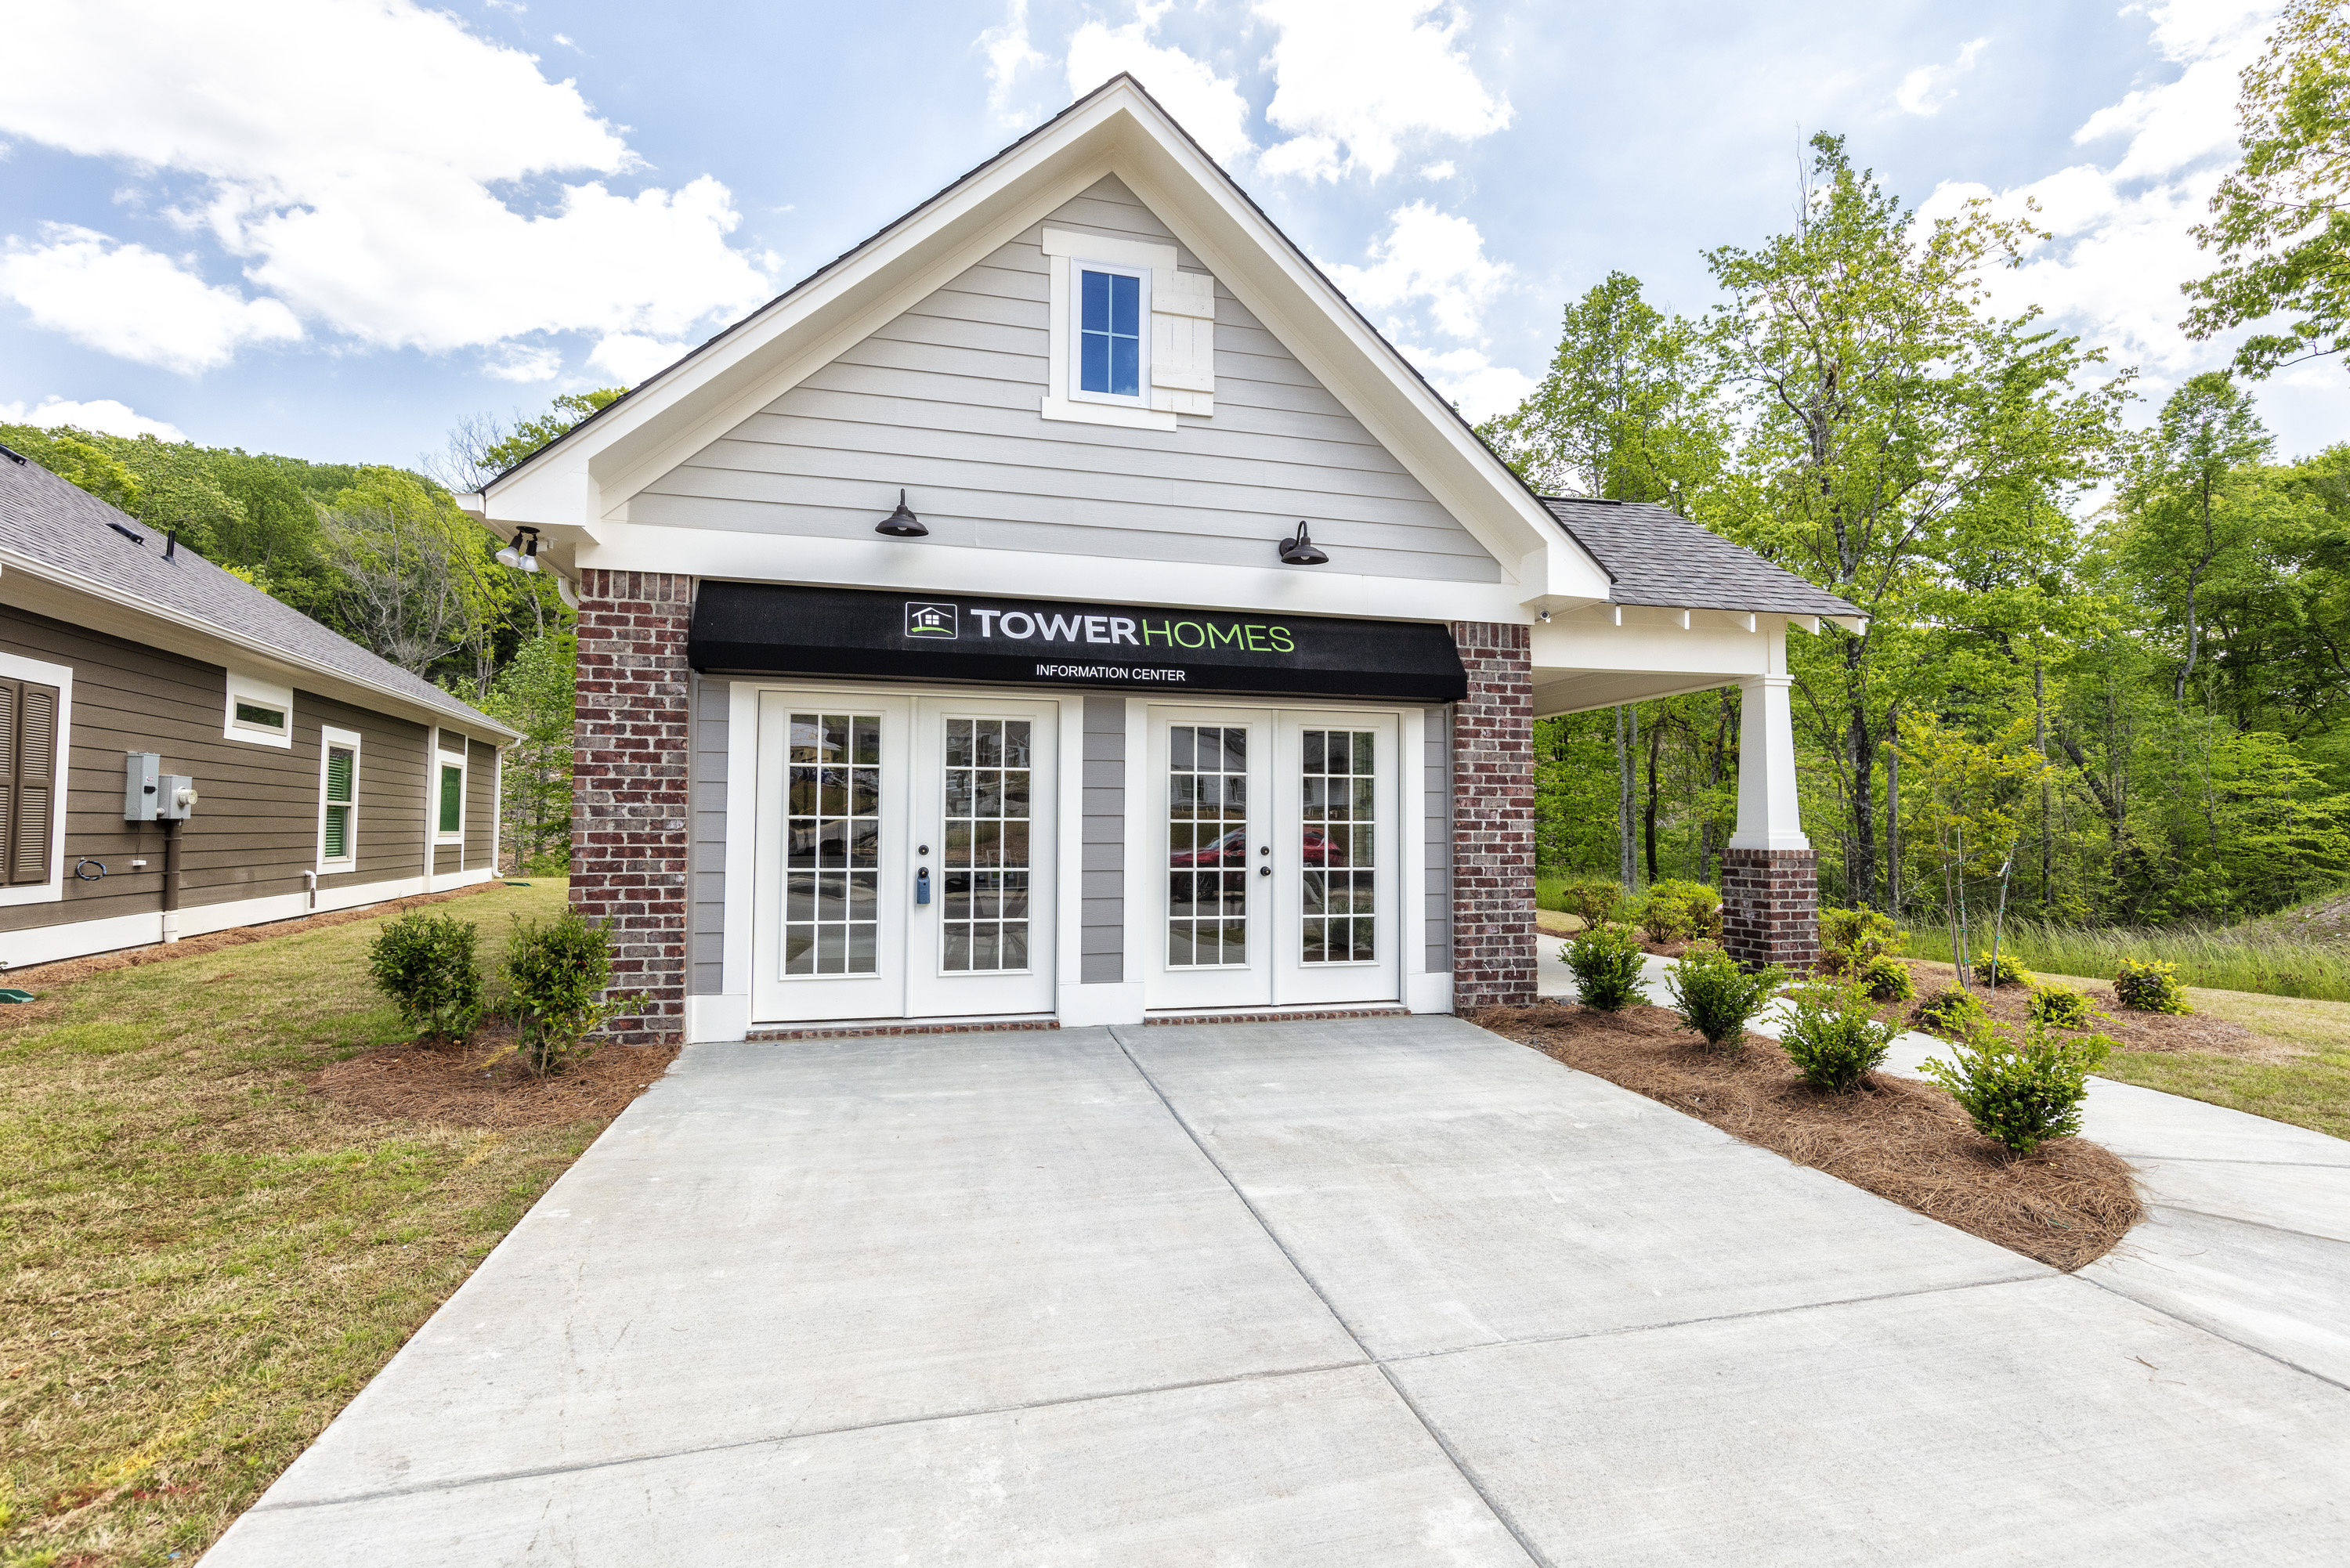 Your paycheck goes a long way in Irondale at Grants Mill Valley by Tower Homes